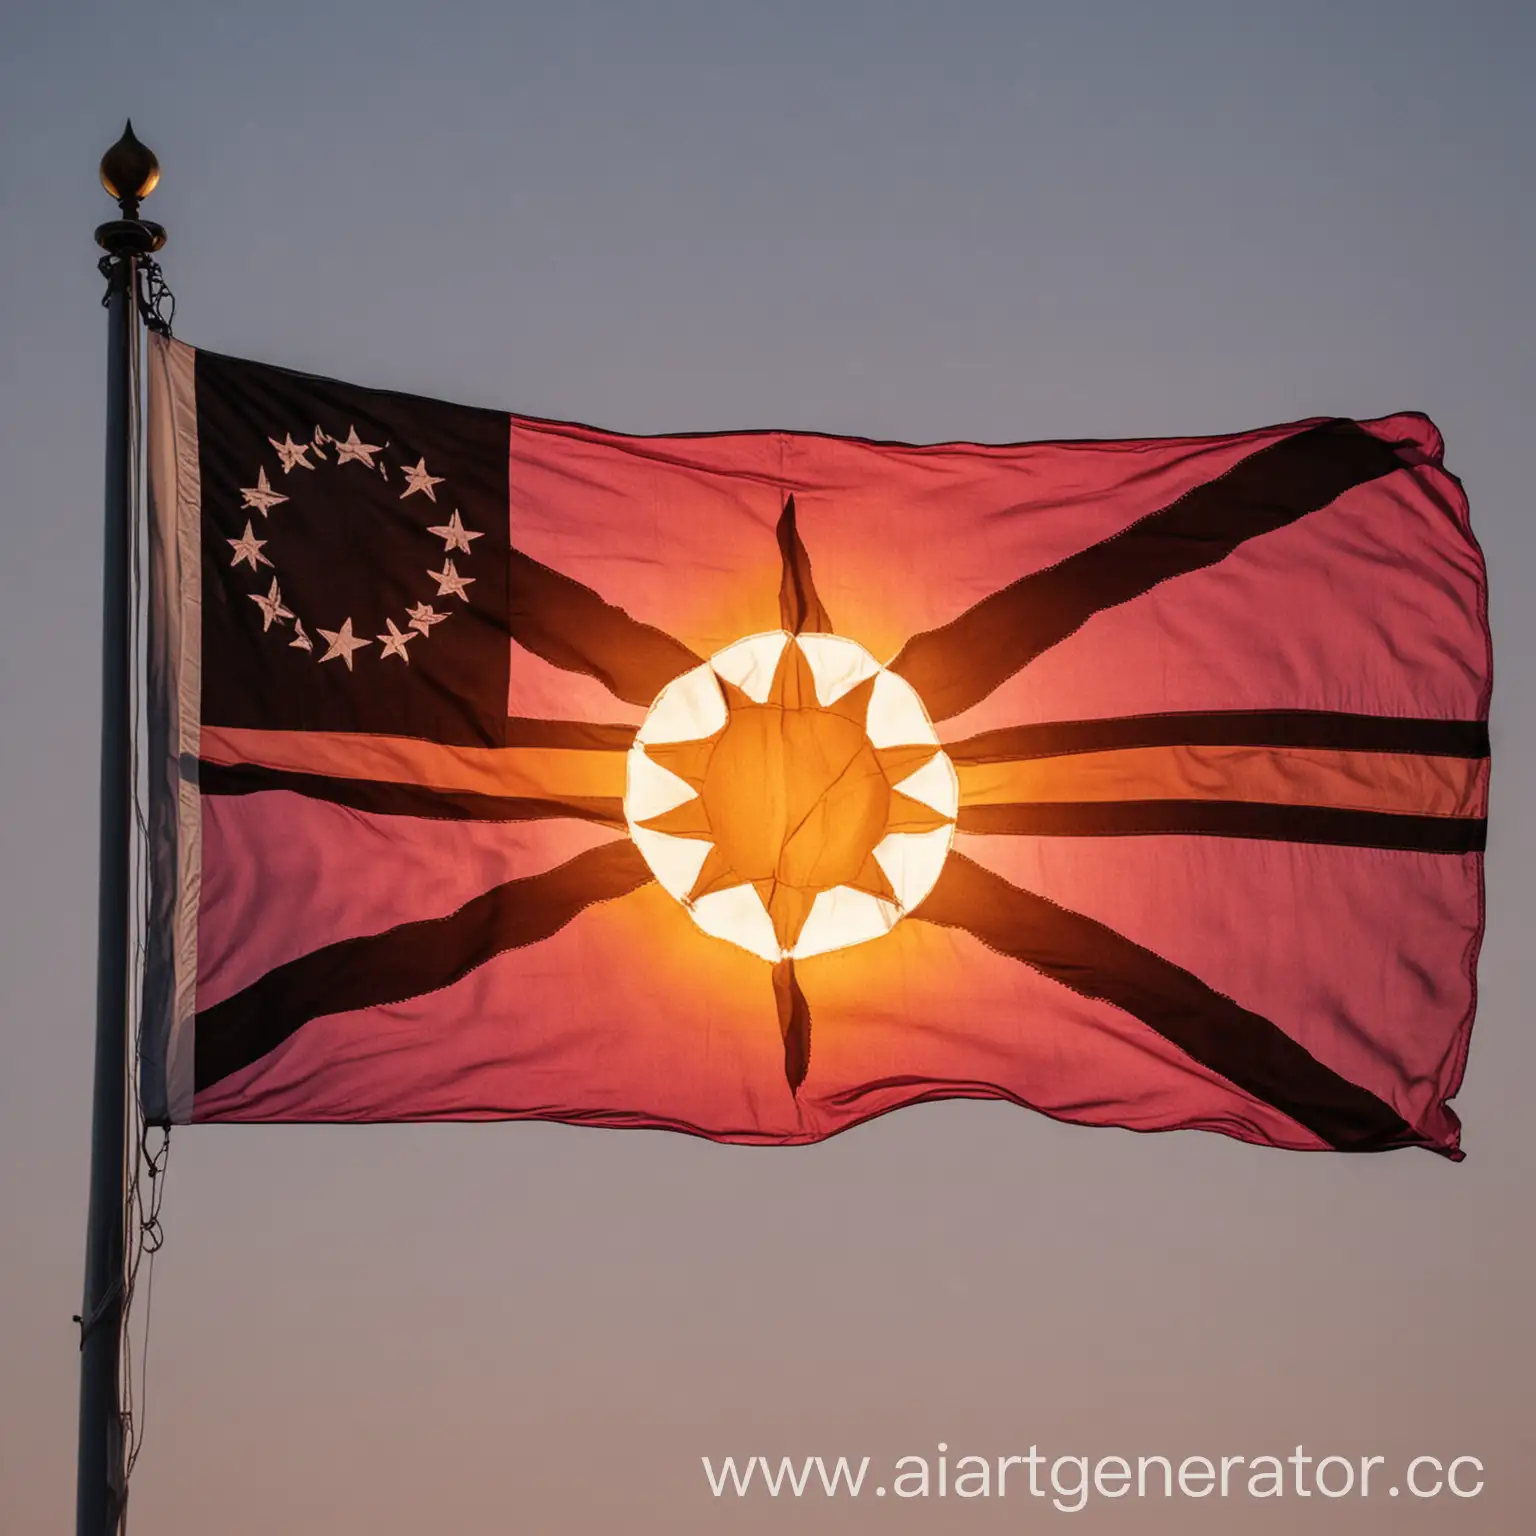 Triangular-Flag-with-Sunrise-and-Sunset-Colors-Depicting-Hope-and-Resilience